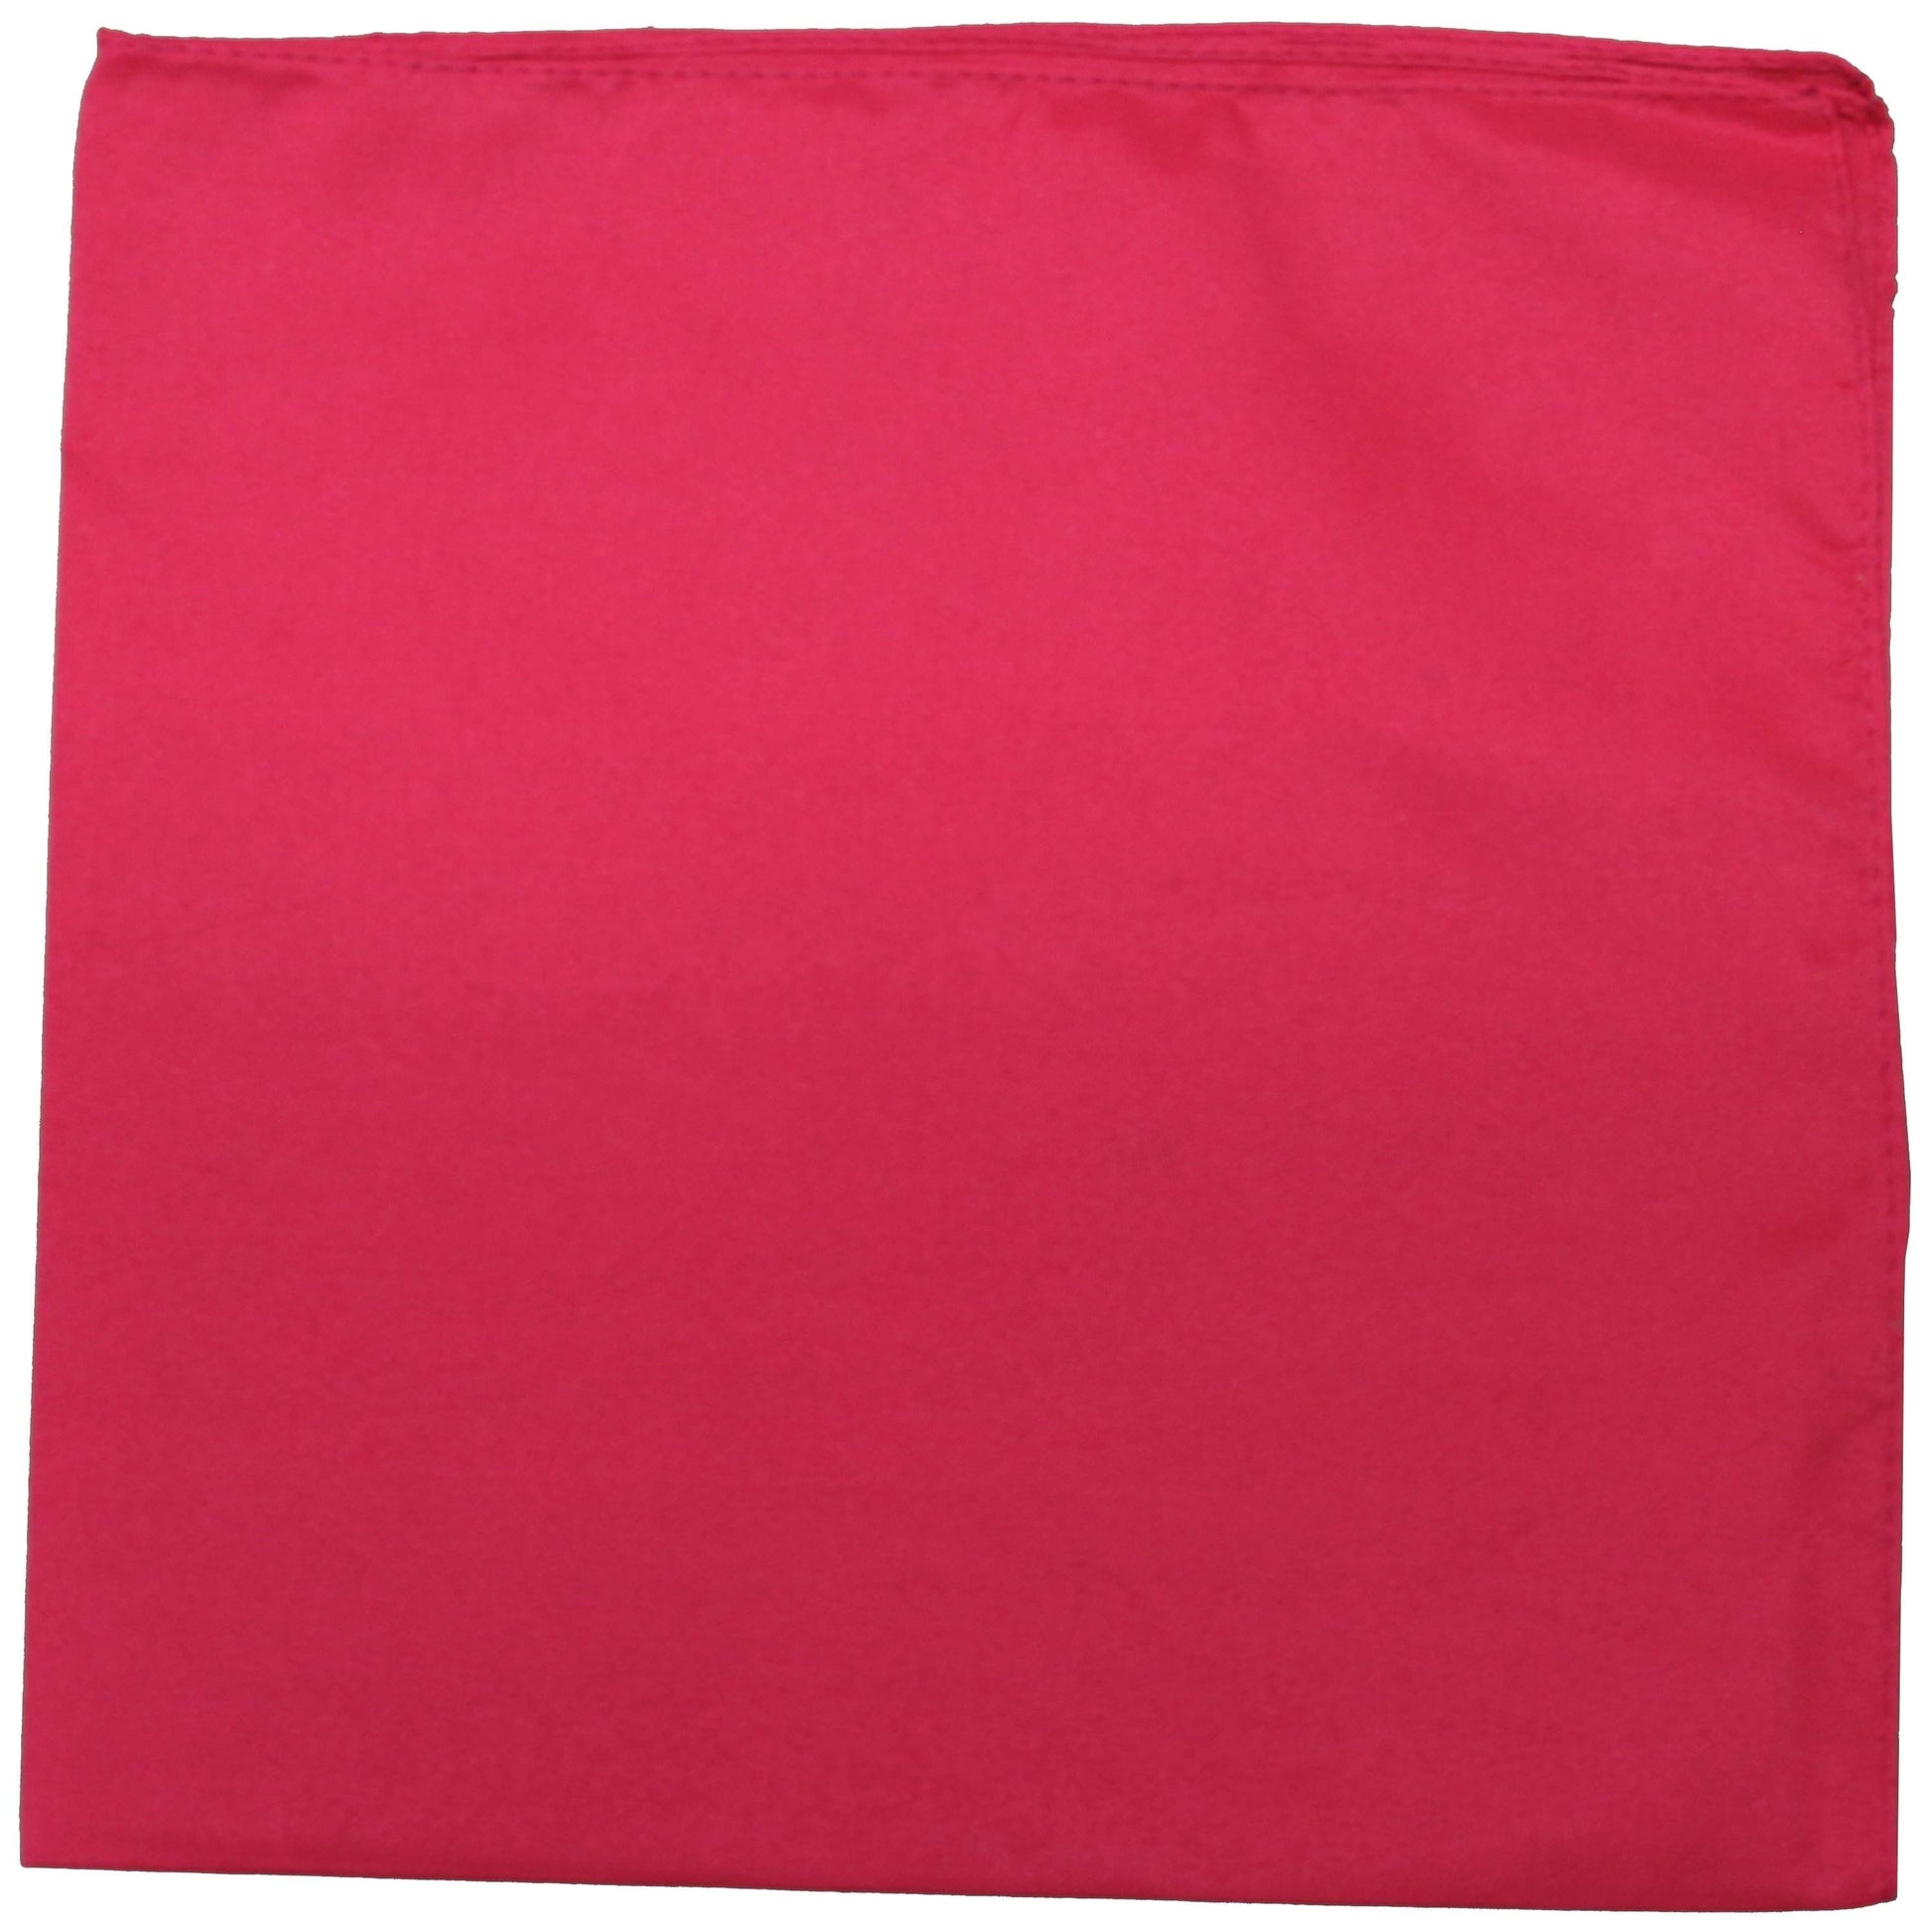 Pack of 2 Solid Cotton Extra Large Bandanas - 27 x 27 Inches / 68 x 68 cm